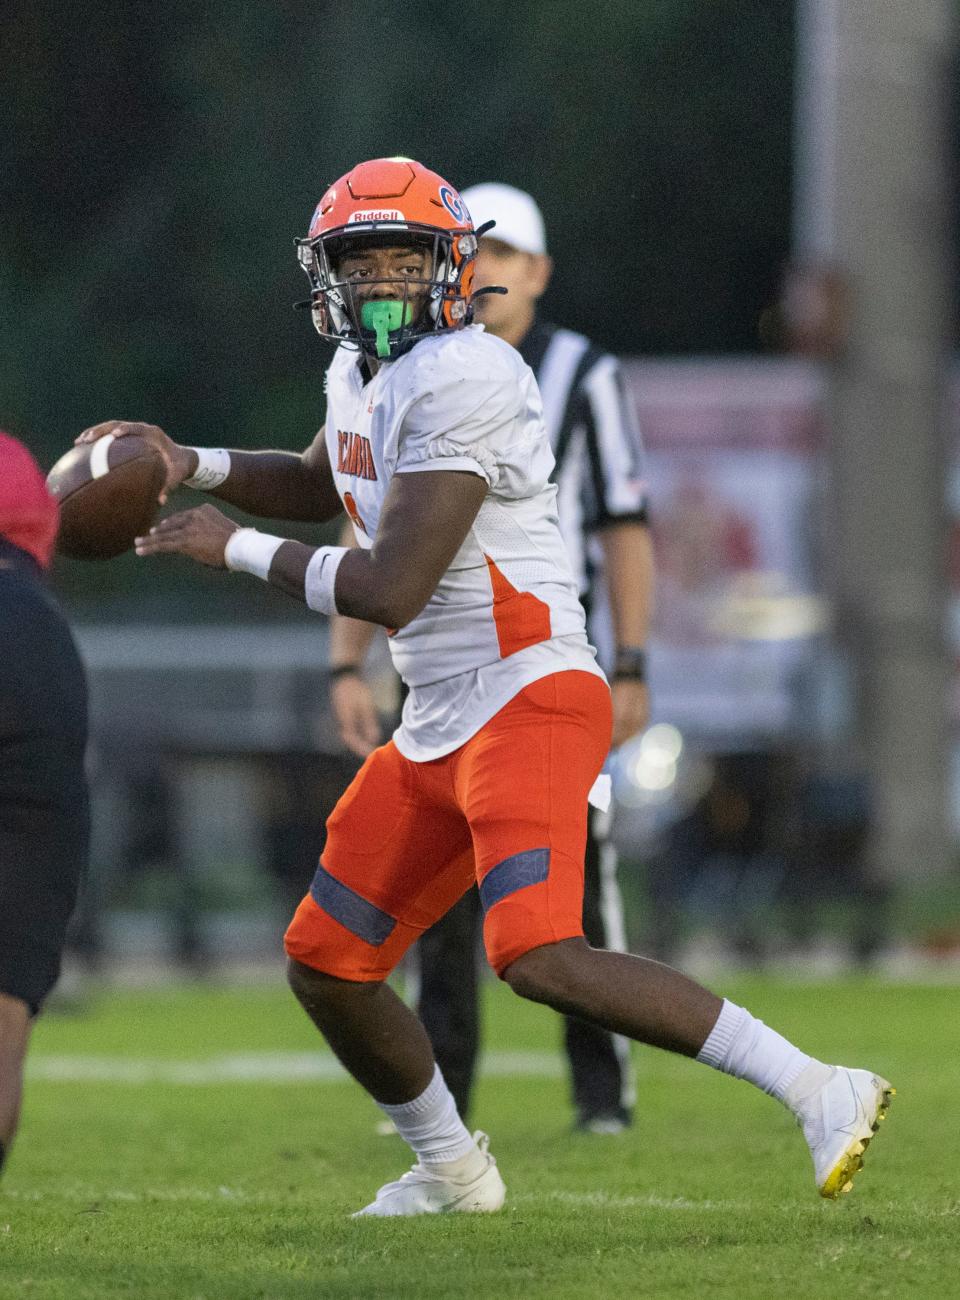 Quarterback Ammiel Steele (3) looks for an open receiver during the Escambia vs West Florida football game at West Florida High School in Pensacola on Friday, Aug. 26, 2022.